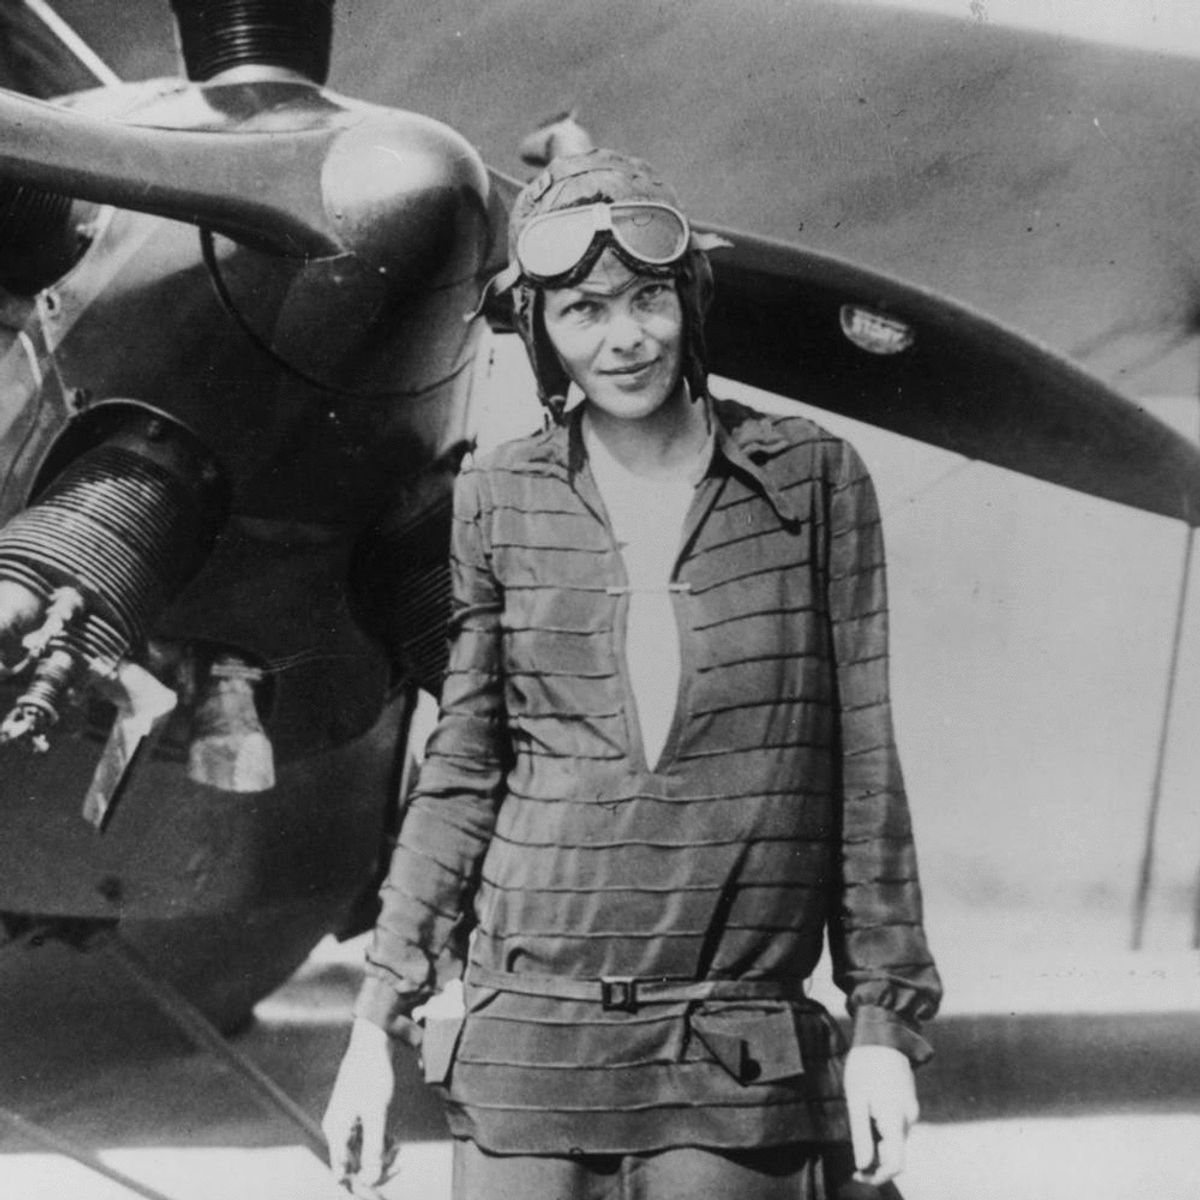 Researchers Now Say They Once Had the Remains of Pilot Amelia Earhart